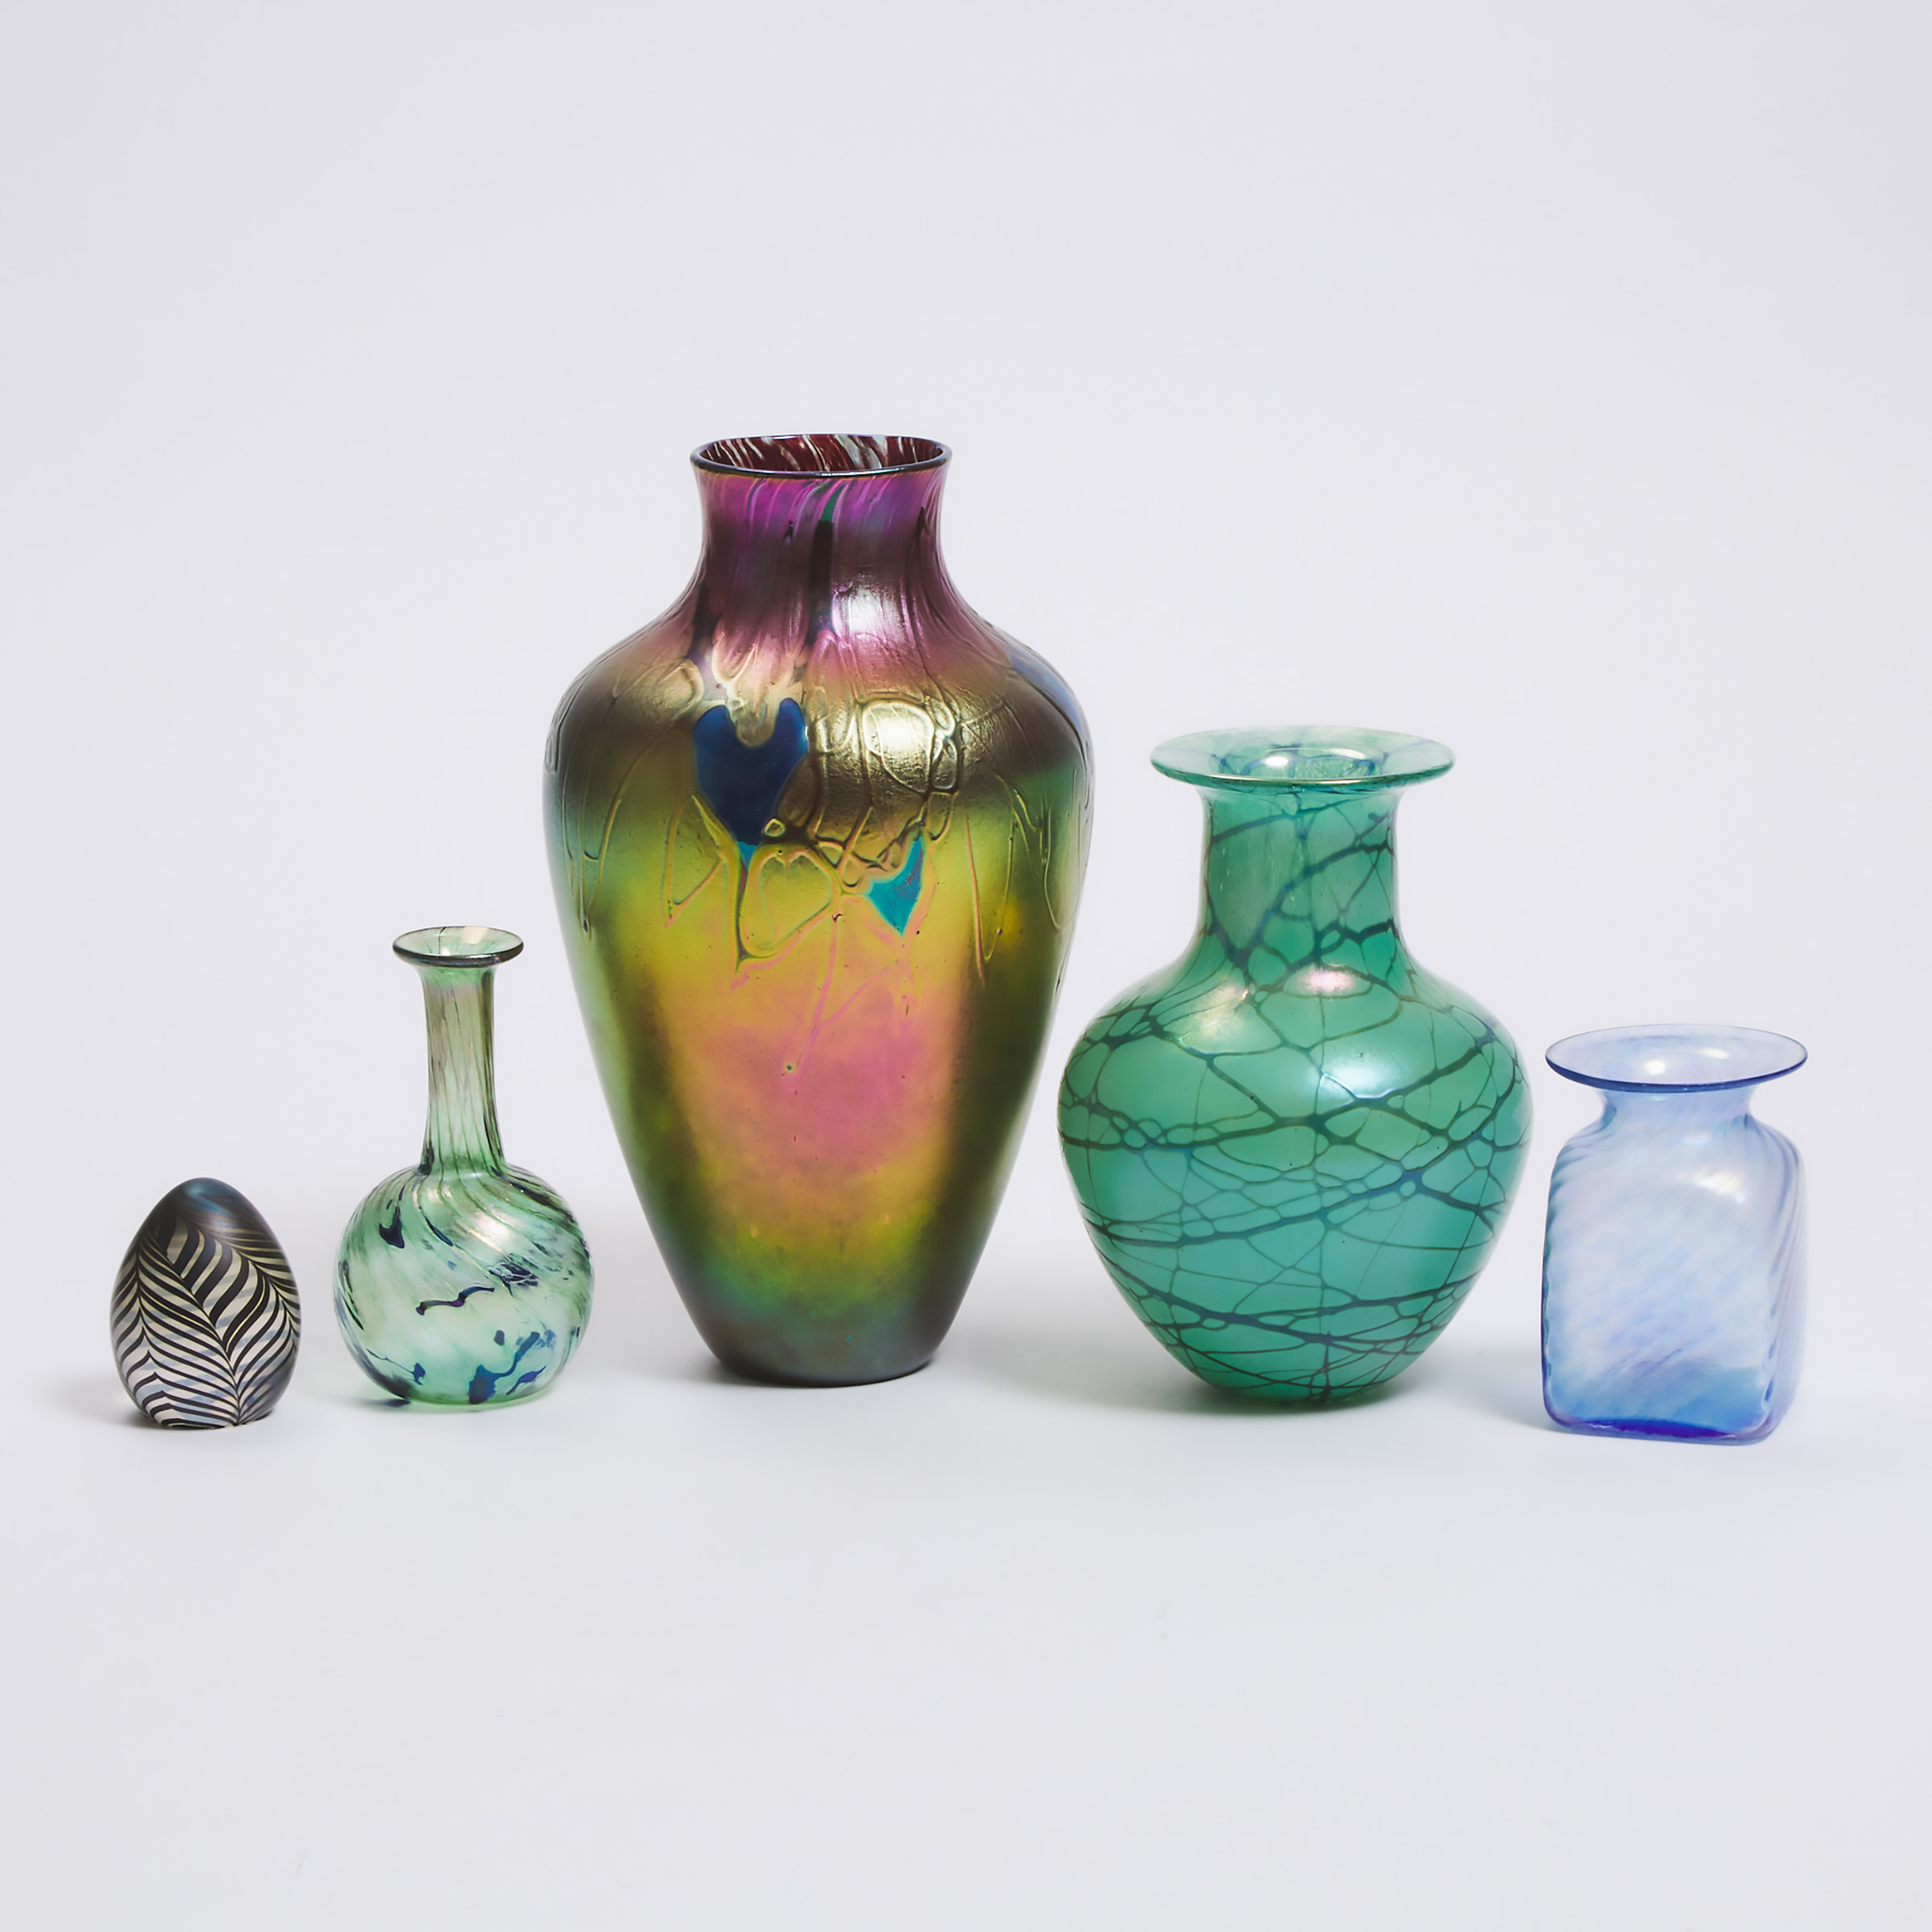 Four Robert Held and Skookum Iridescent Glass Vases and a Paperweight, late 20th century